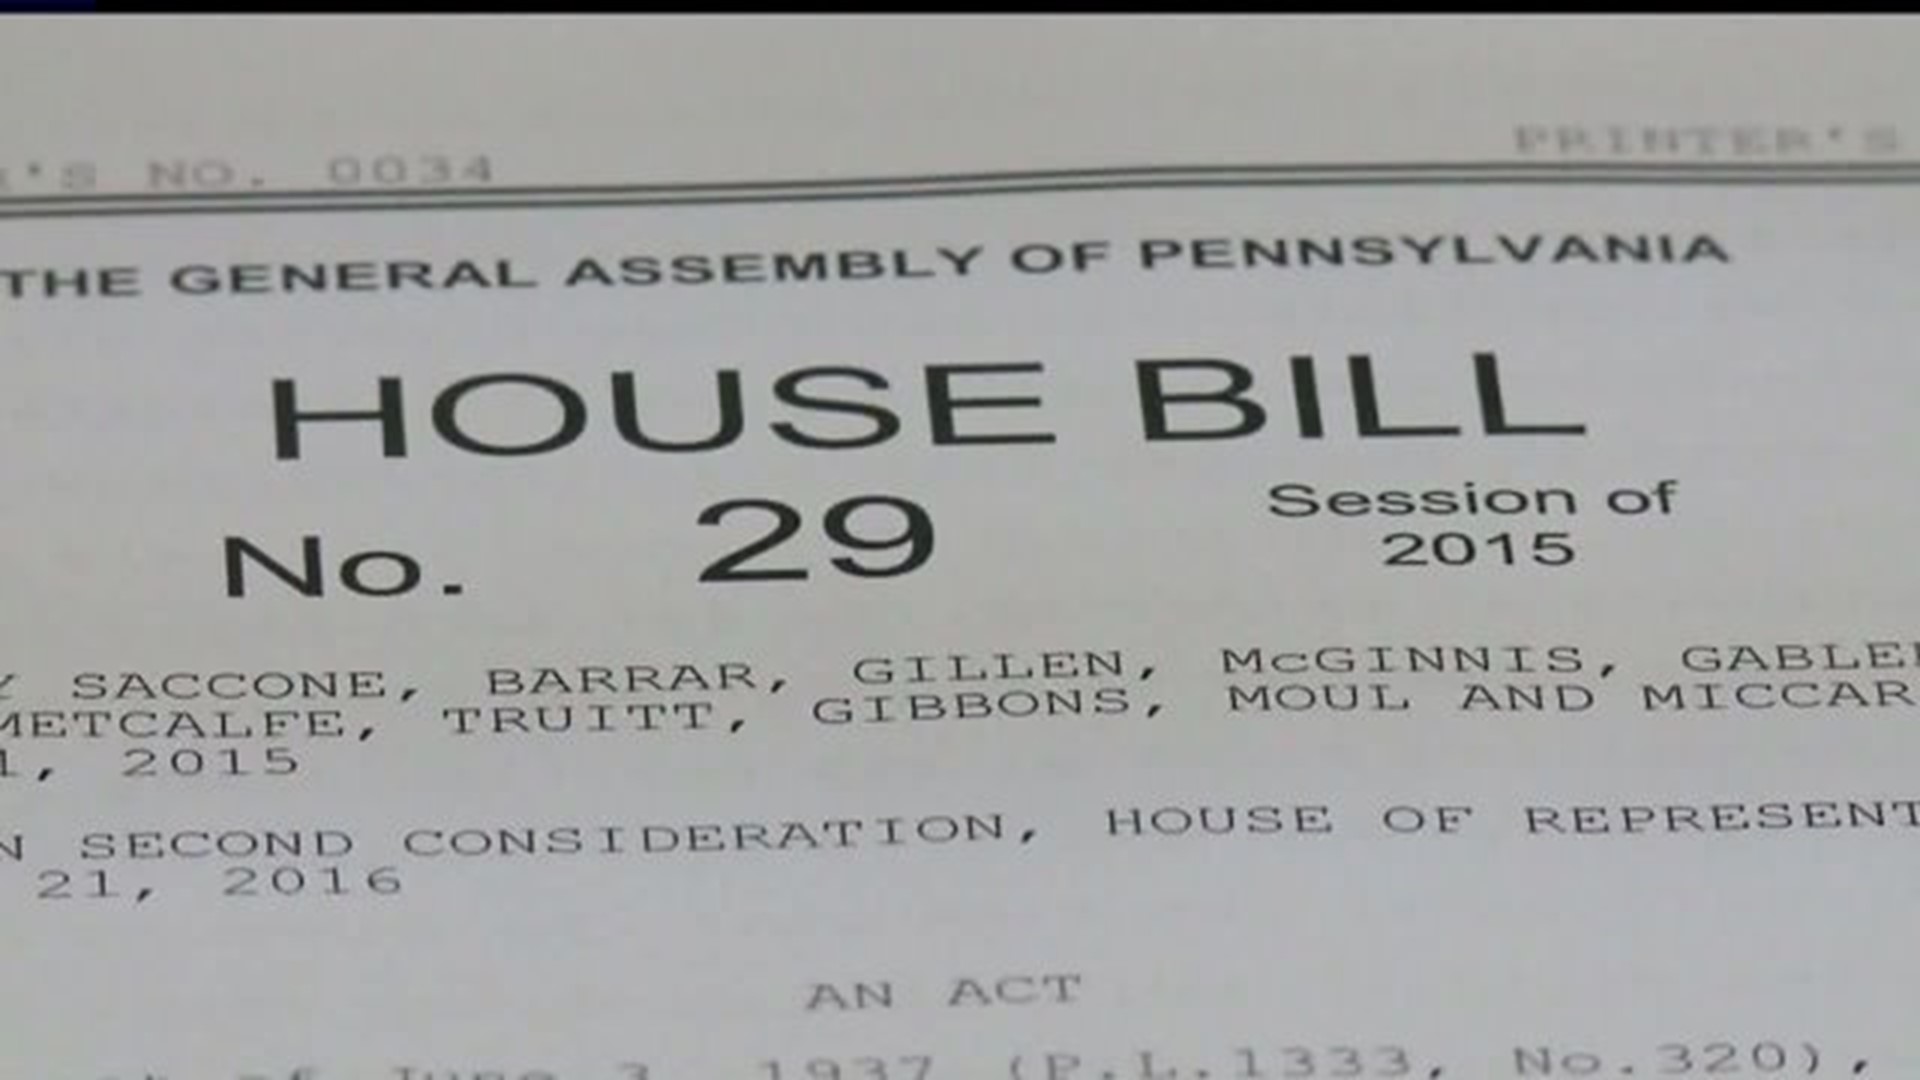 Bill 29 could let poll watchers work polls in any county in the state